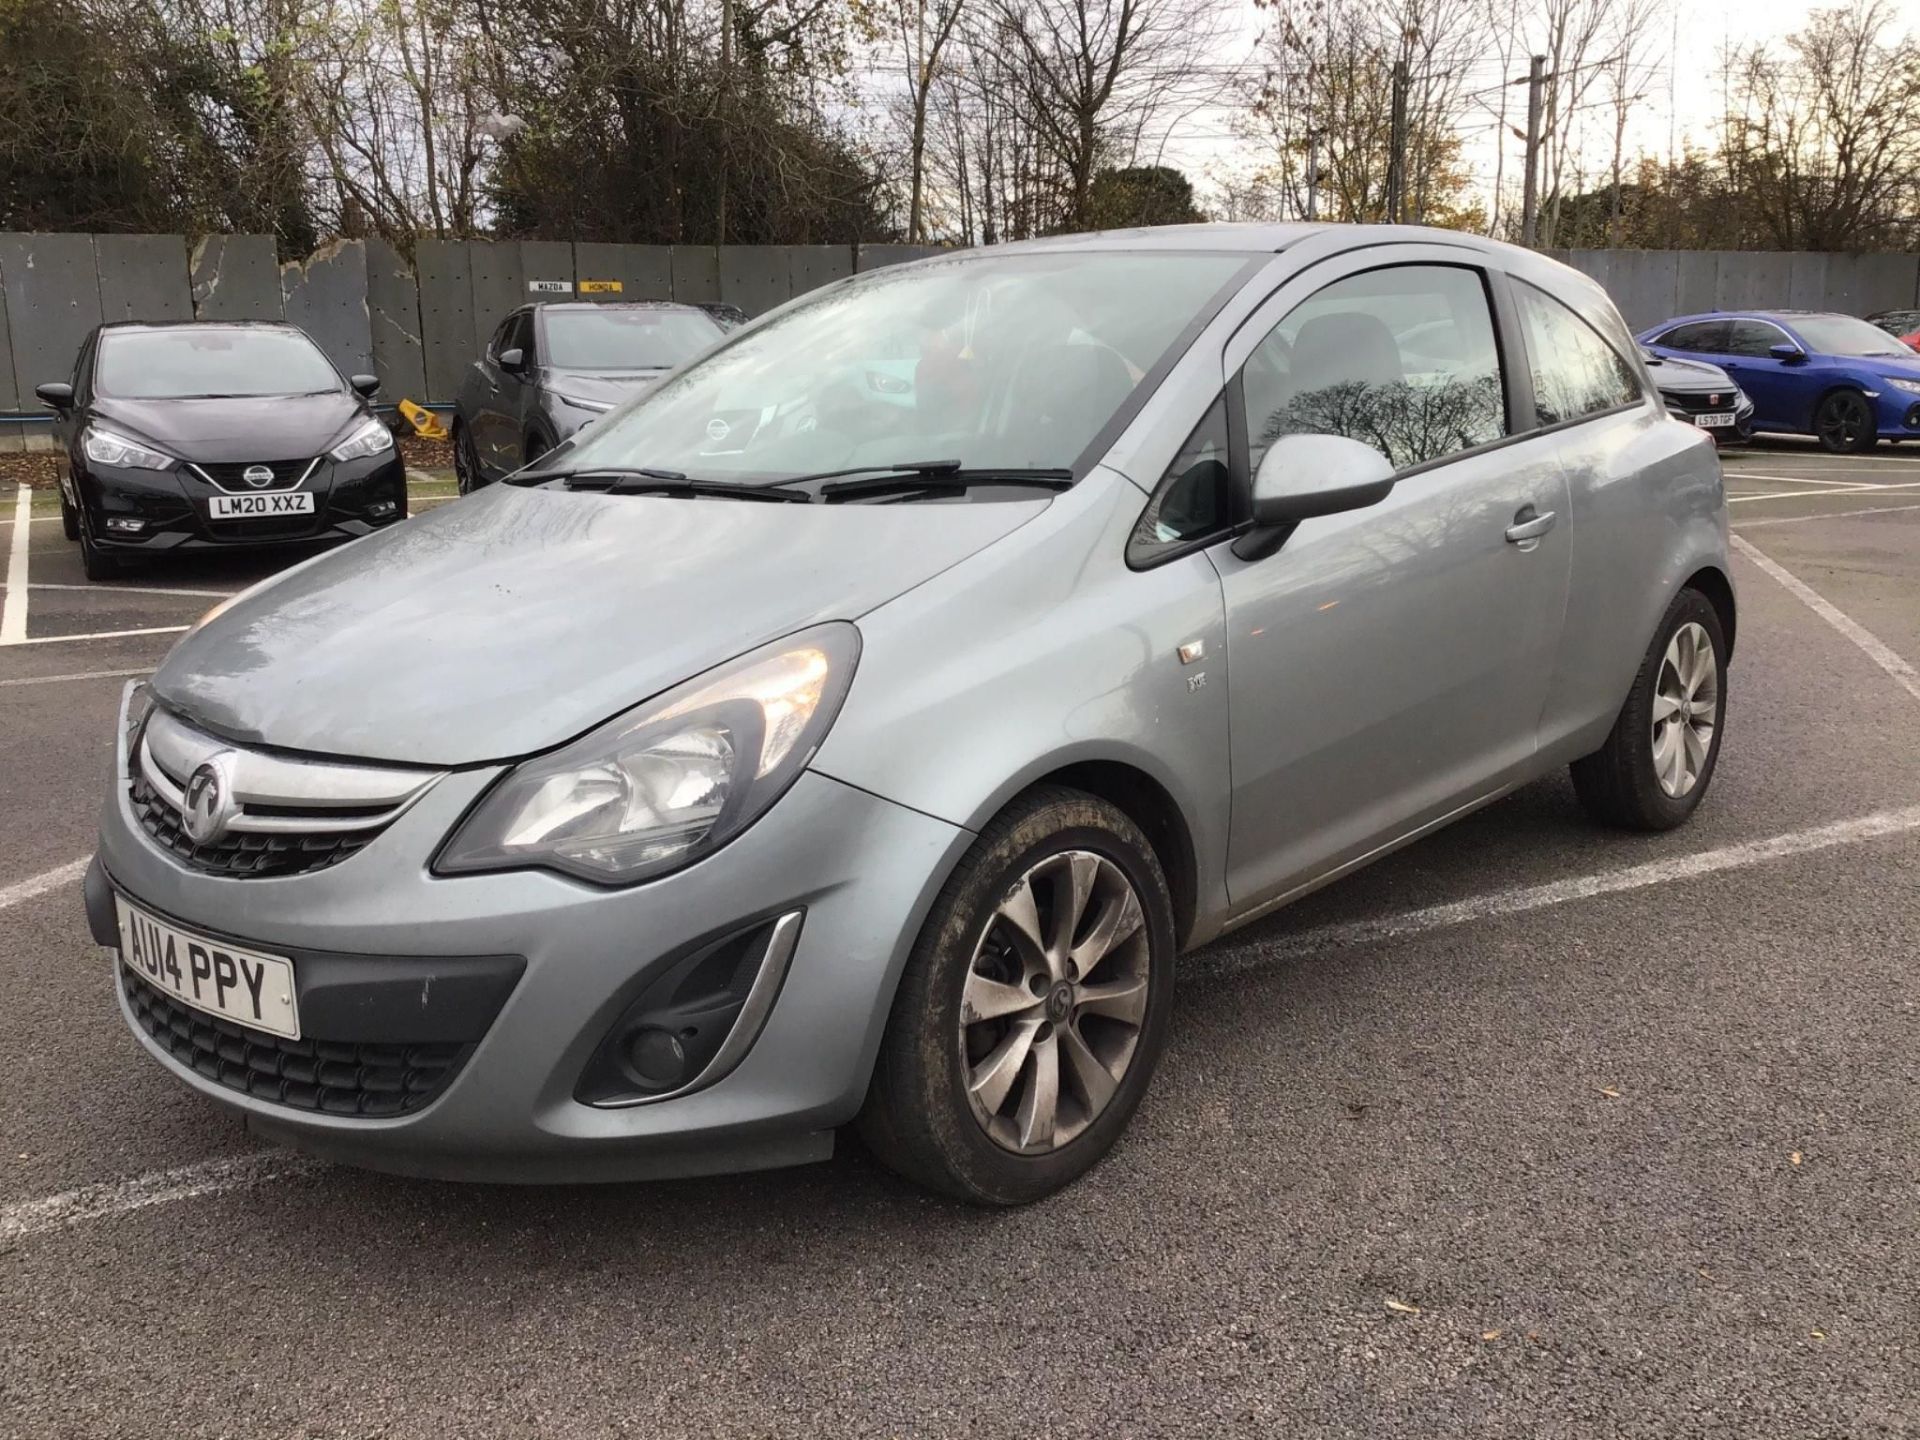 2014 Vauxhall Corsa 1.2 Excite 3 Door Hatchback - CL505 - NO VAT ON THE HAMMER - Location: Corby, - Image 3 of 13